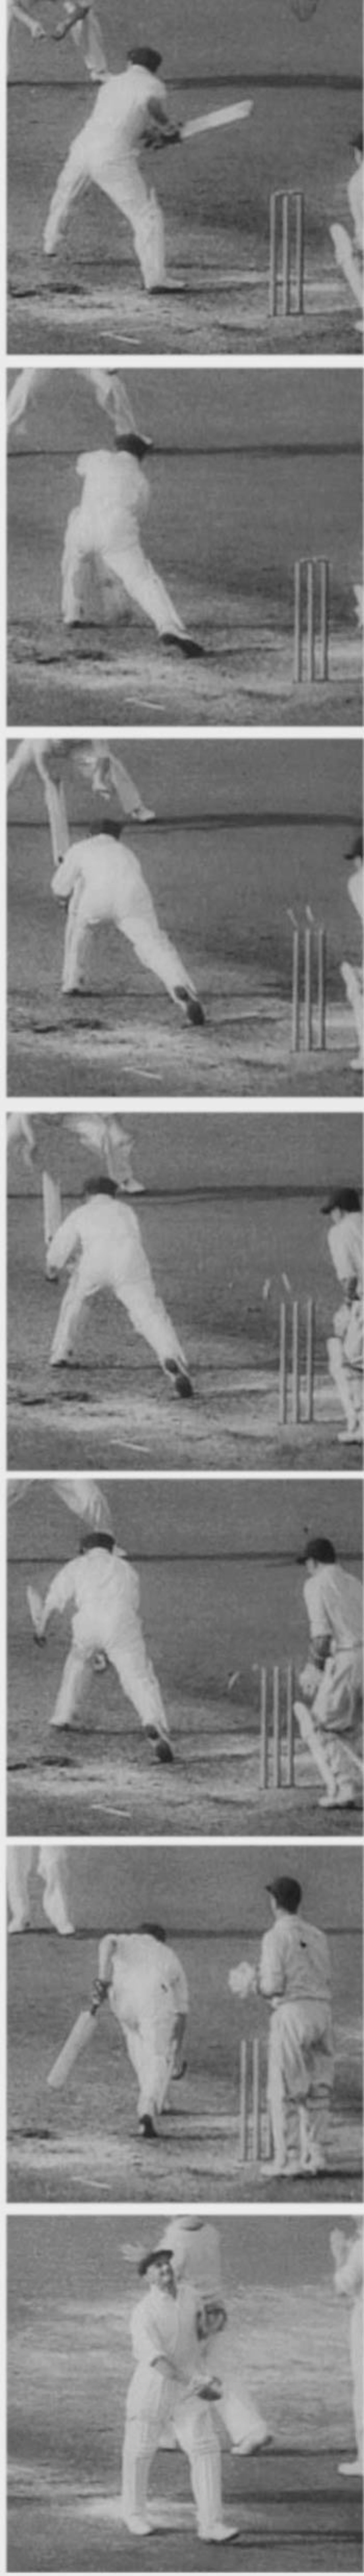 Don Bradman's Test career ends with a duck at The Oval, England v Australia, 5th Test, The Oval, August 1948